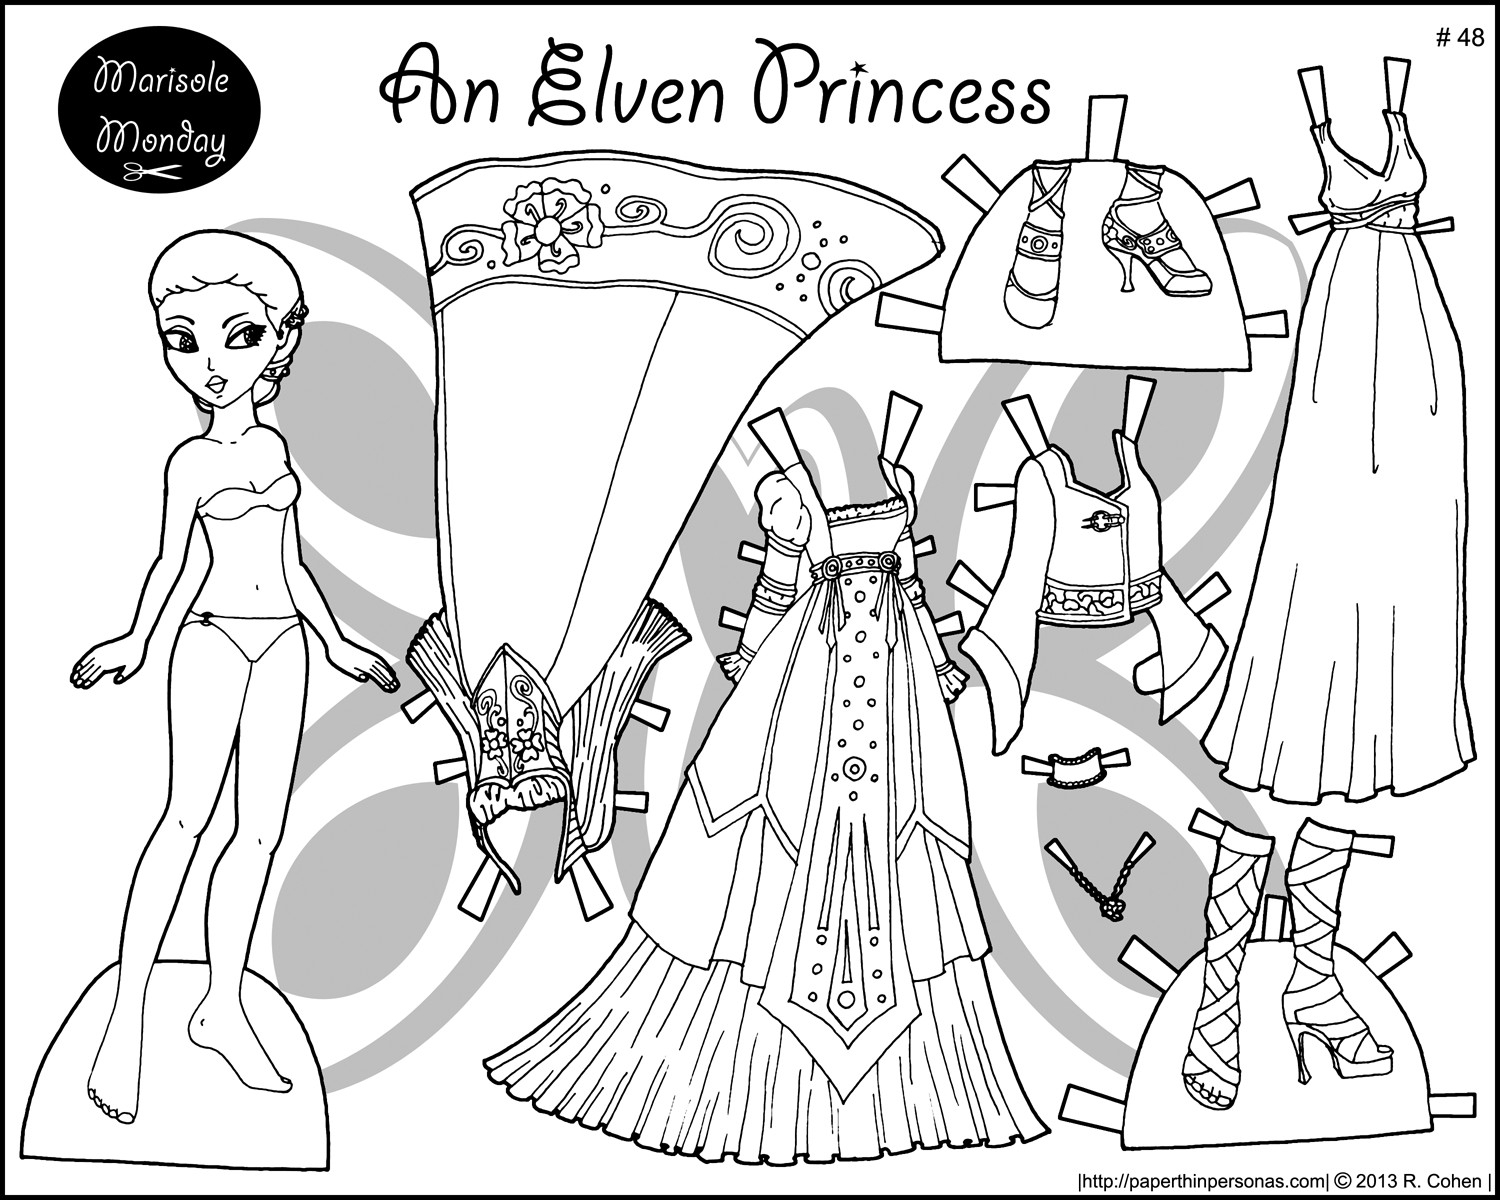 Category: Coloring Page 0 | Coloring Page - Free Printable Paper Doll Coloring Pages